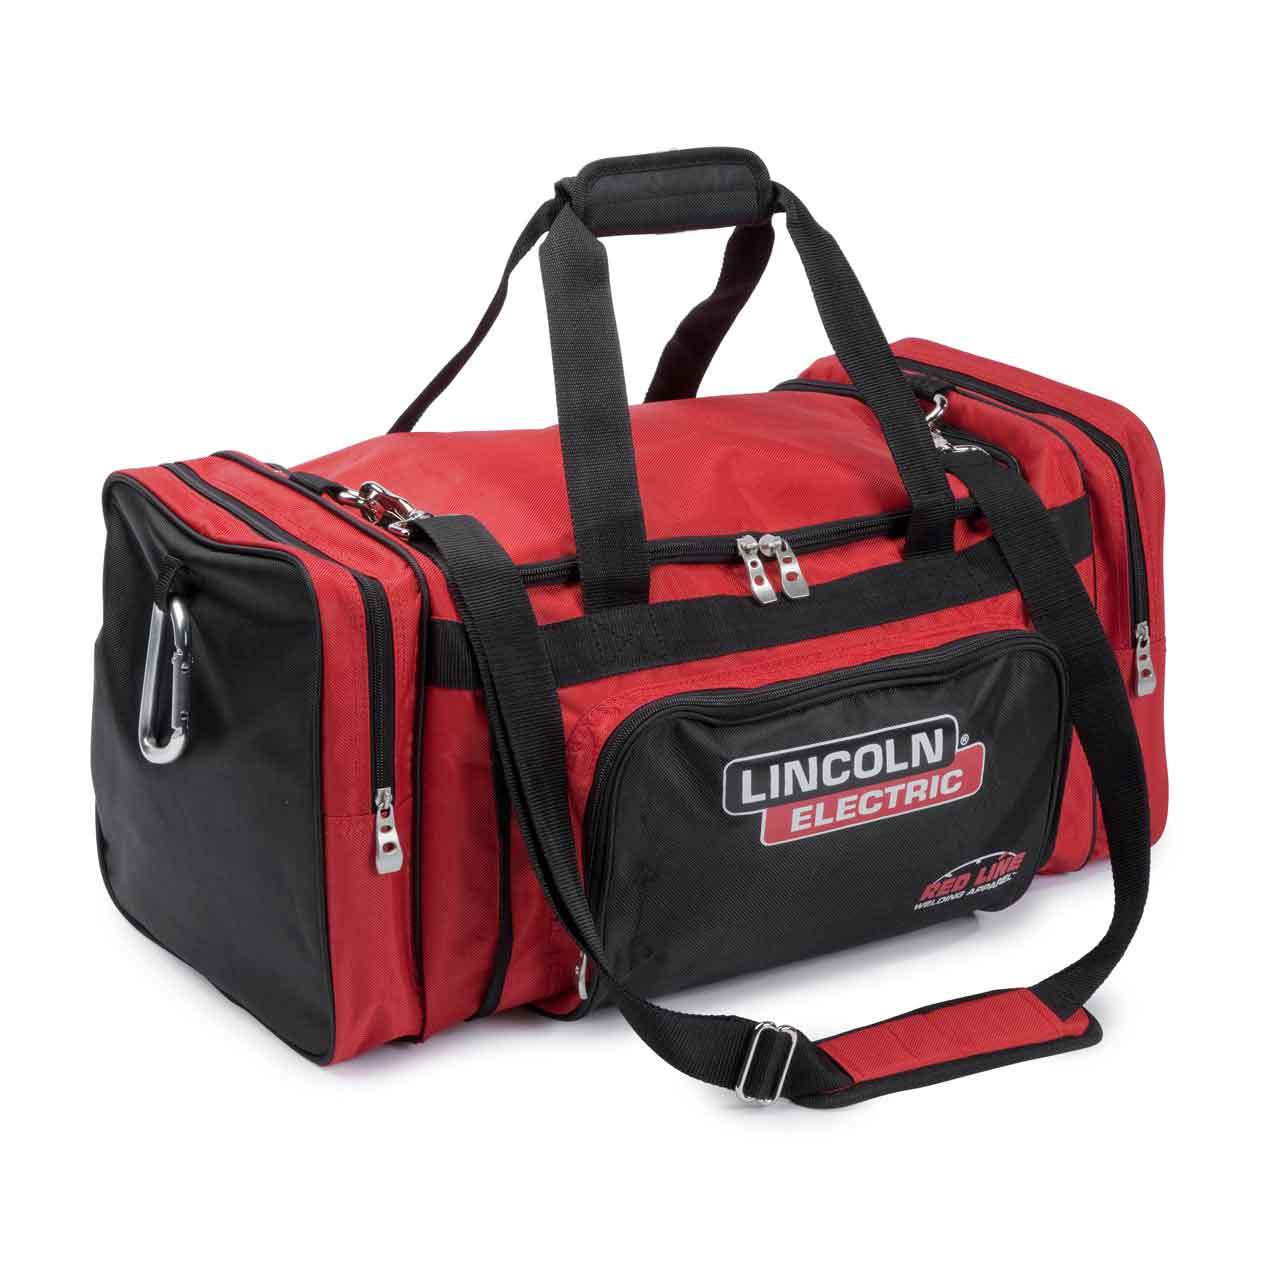 Lincoln Electric Welding Equipment Bag